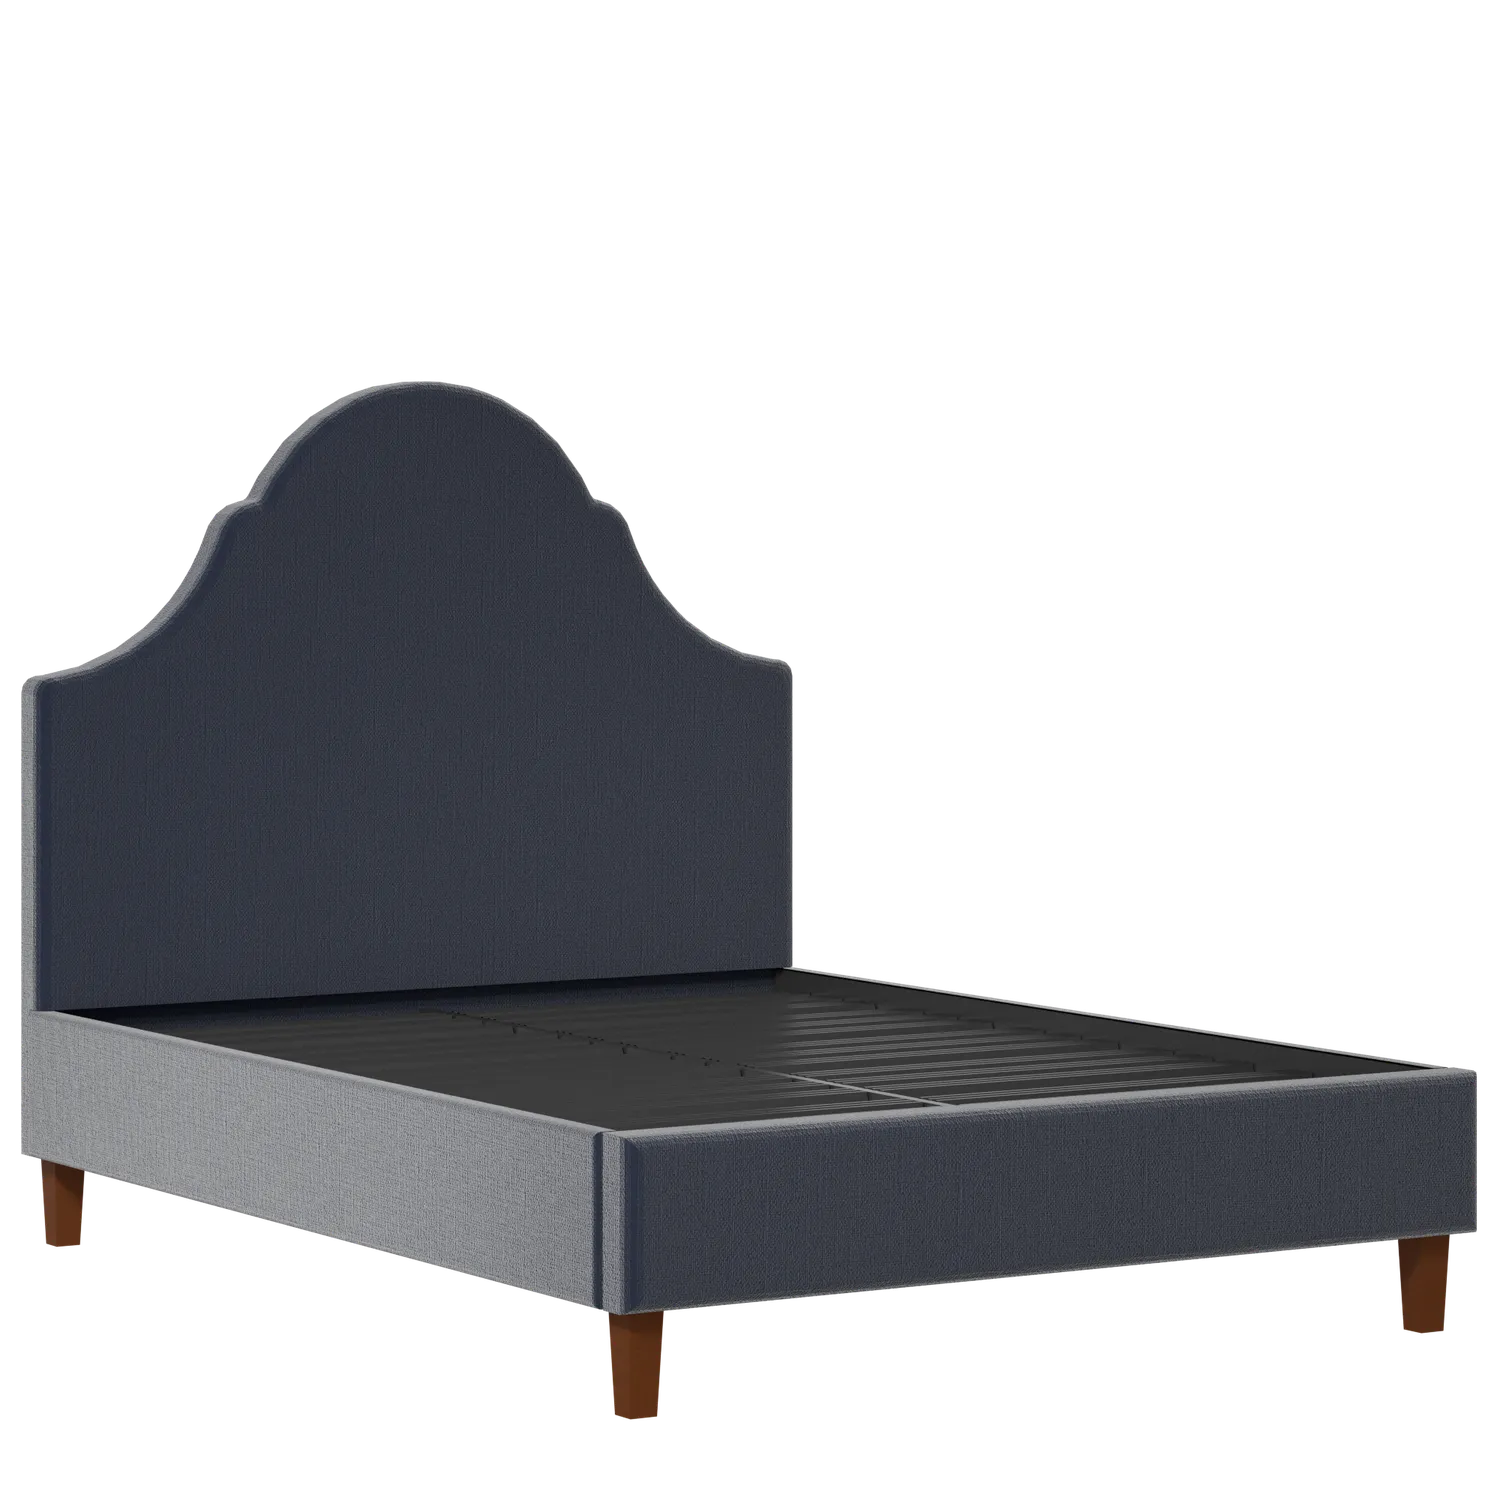 Irvine upholstered bed in oxford blue fabric